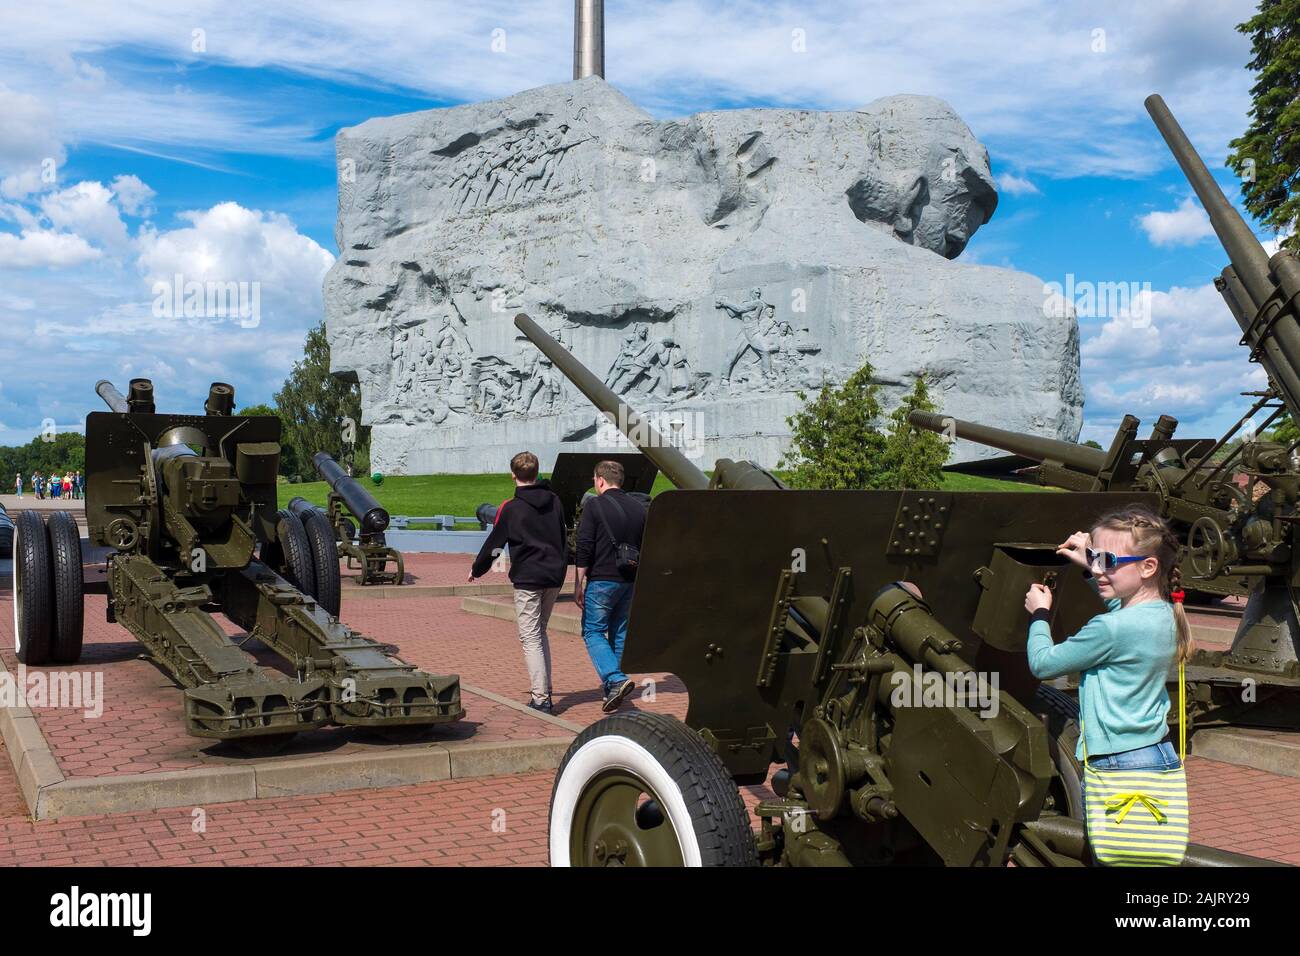 Soviet era tanks and big guns are a part of the items on display at the Brest War Memorial in Belarus Stock Photo